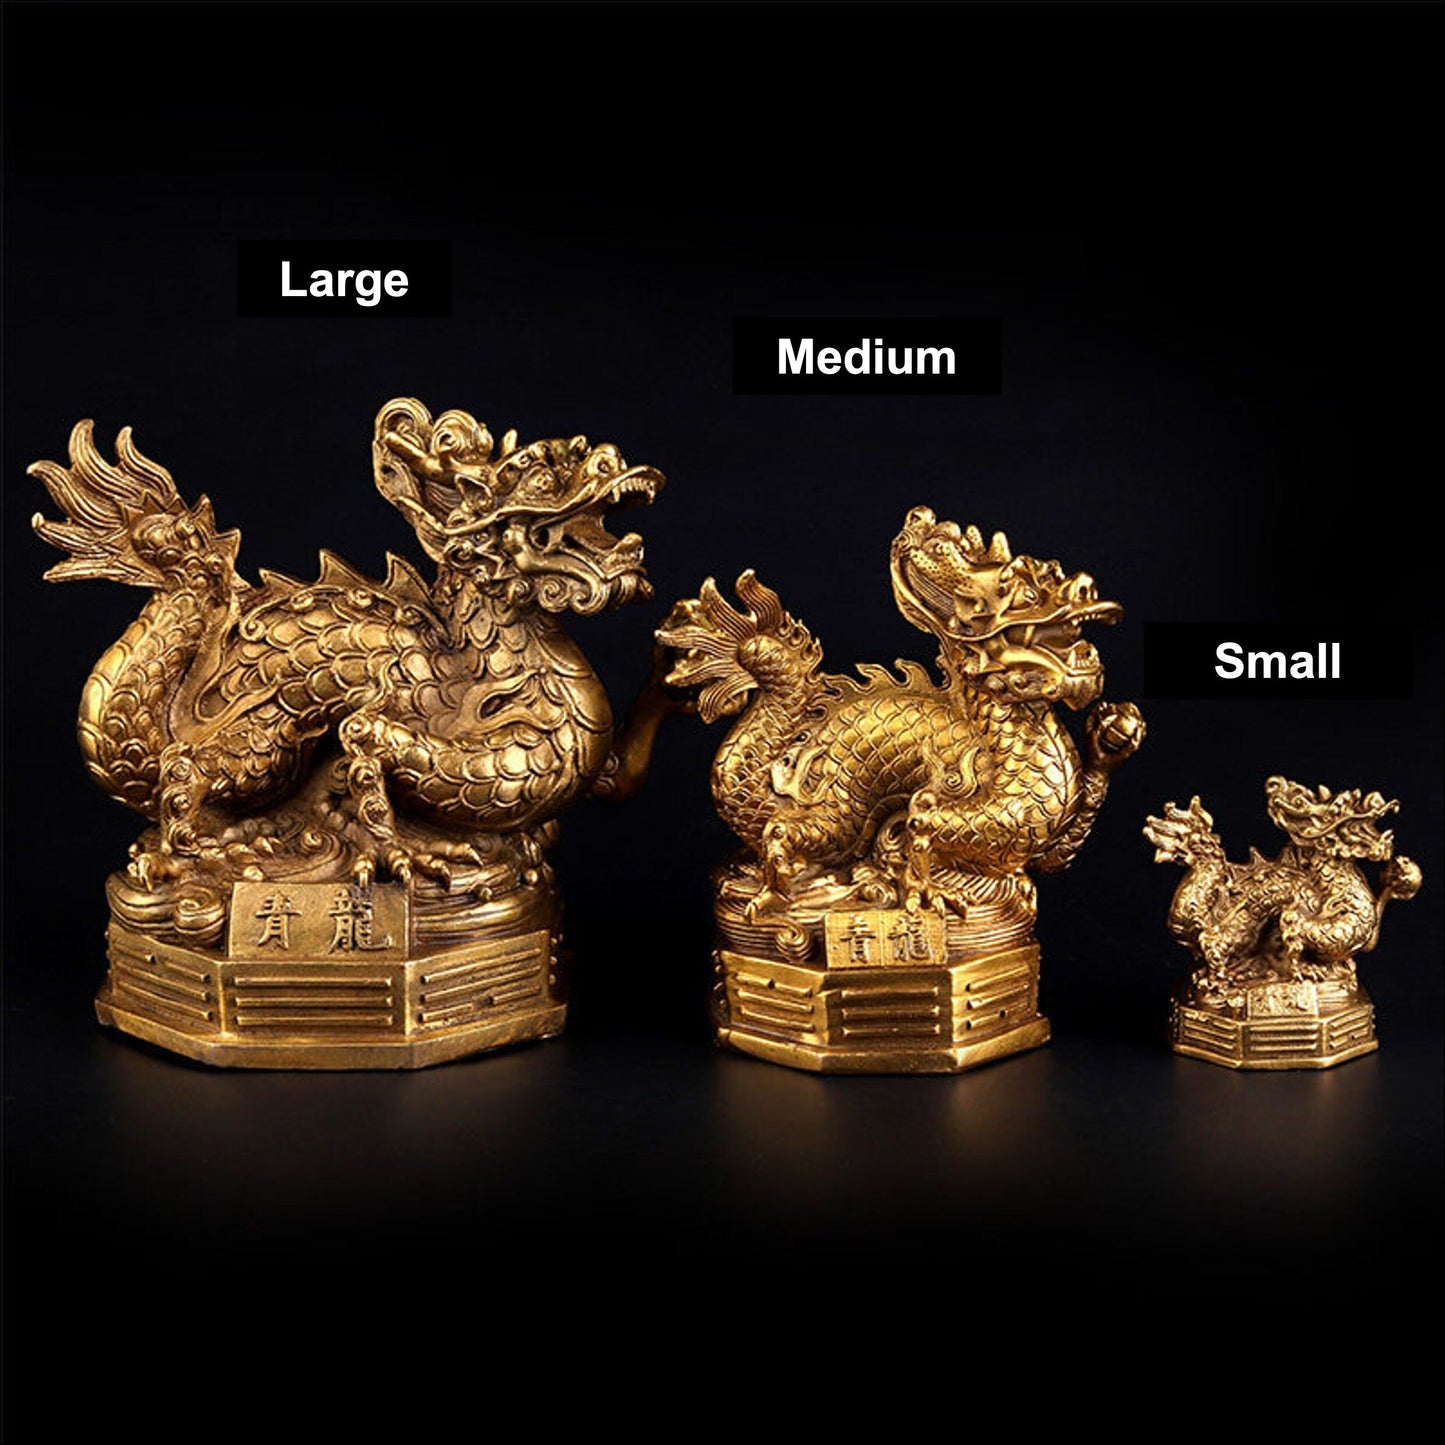 Brass Four Guardian Sculpture & Statue for Fengshui | Dragon Rosefinch Tiger Tortoise | Good Fortune and Prosperity | Home Office Decor